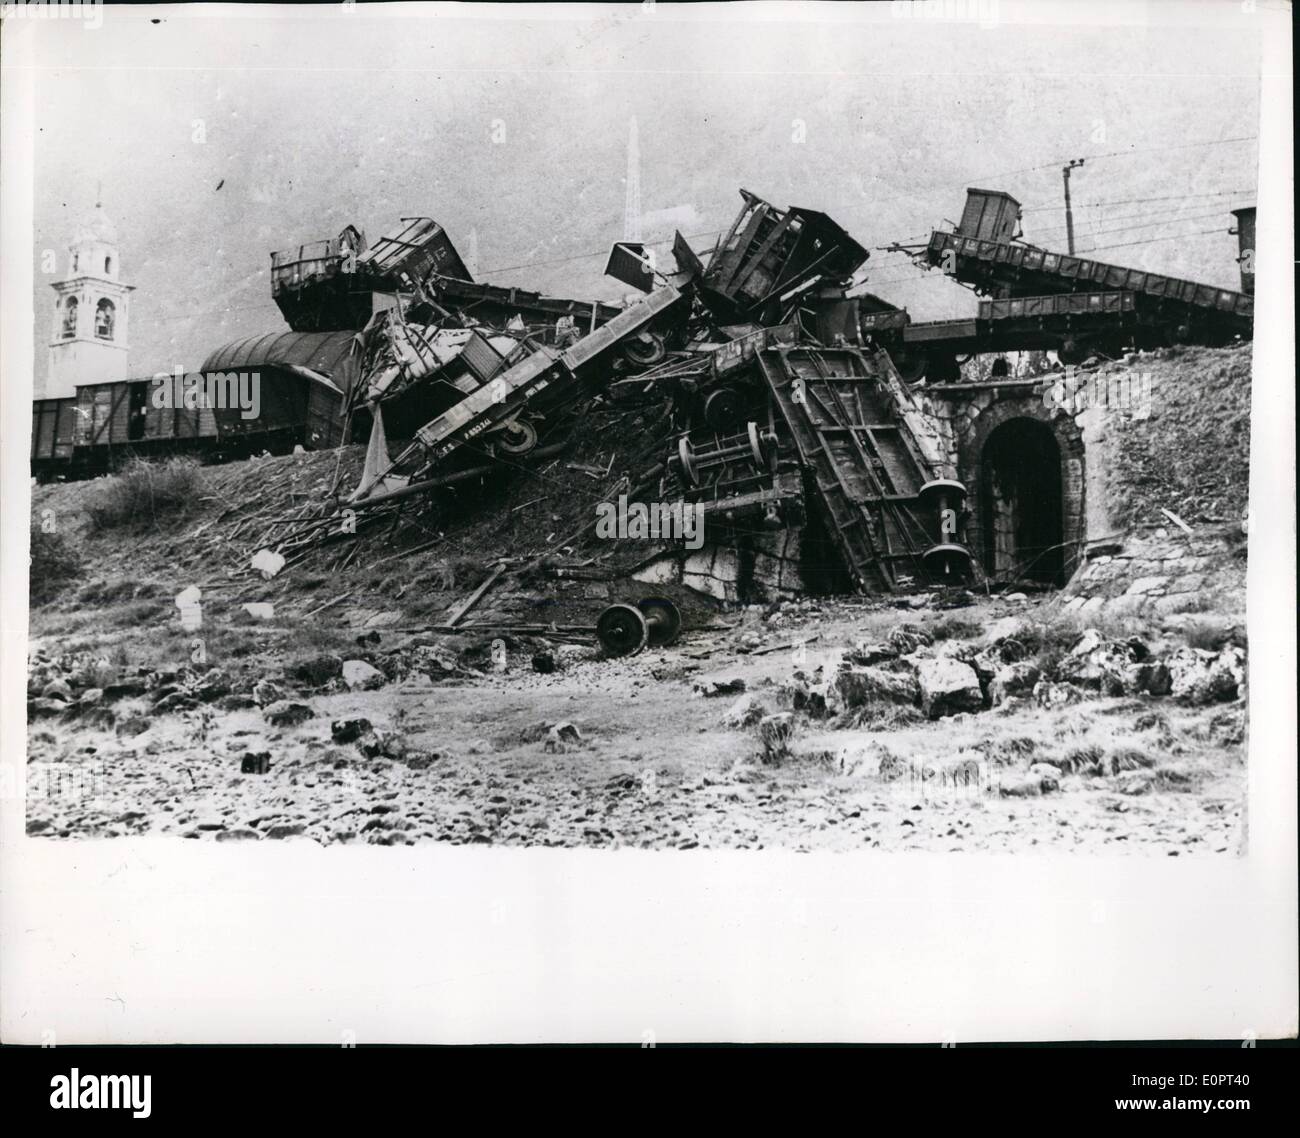 Feb. 02, 1957 - Goods Train Disaster near the Brenner Pass. More than forty seven wagon a were destroyed when a forty seven wagon goods train was derailed at Rovereto, near Trent, in Northern Italy recently. The disaster was caused by the axle of one of the wagons broke loo Damage is ed mated at many million lire - but luckily no lives were lost. Photo Shows The scene of the disaster - showing some of the wrdoked trucks. Stock Photo